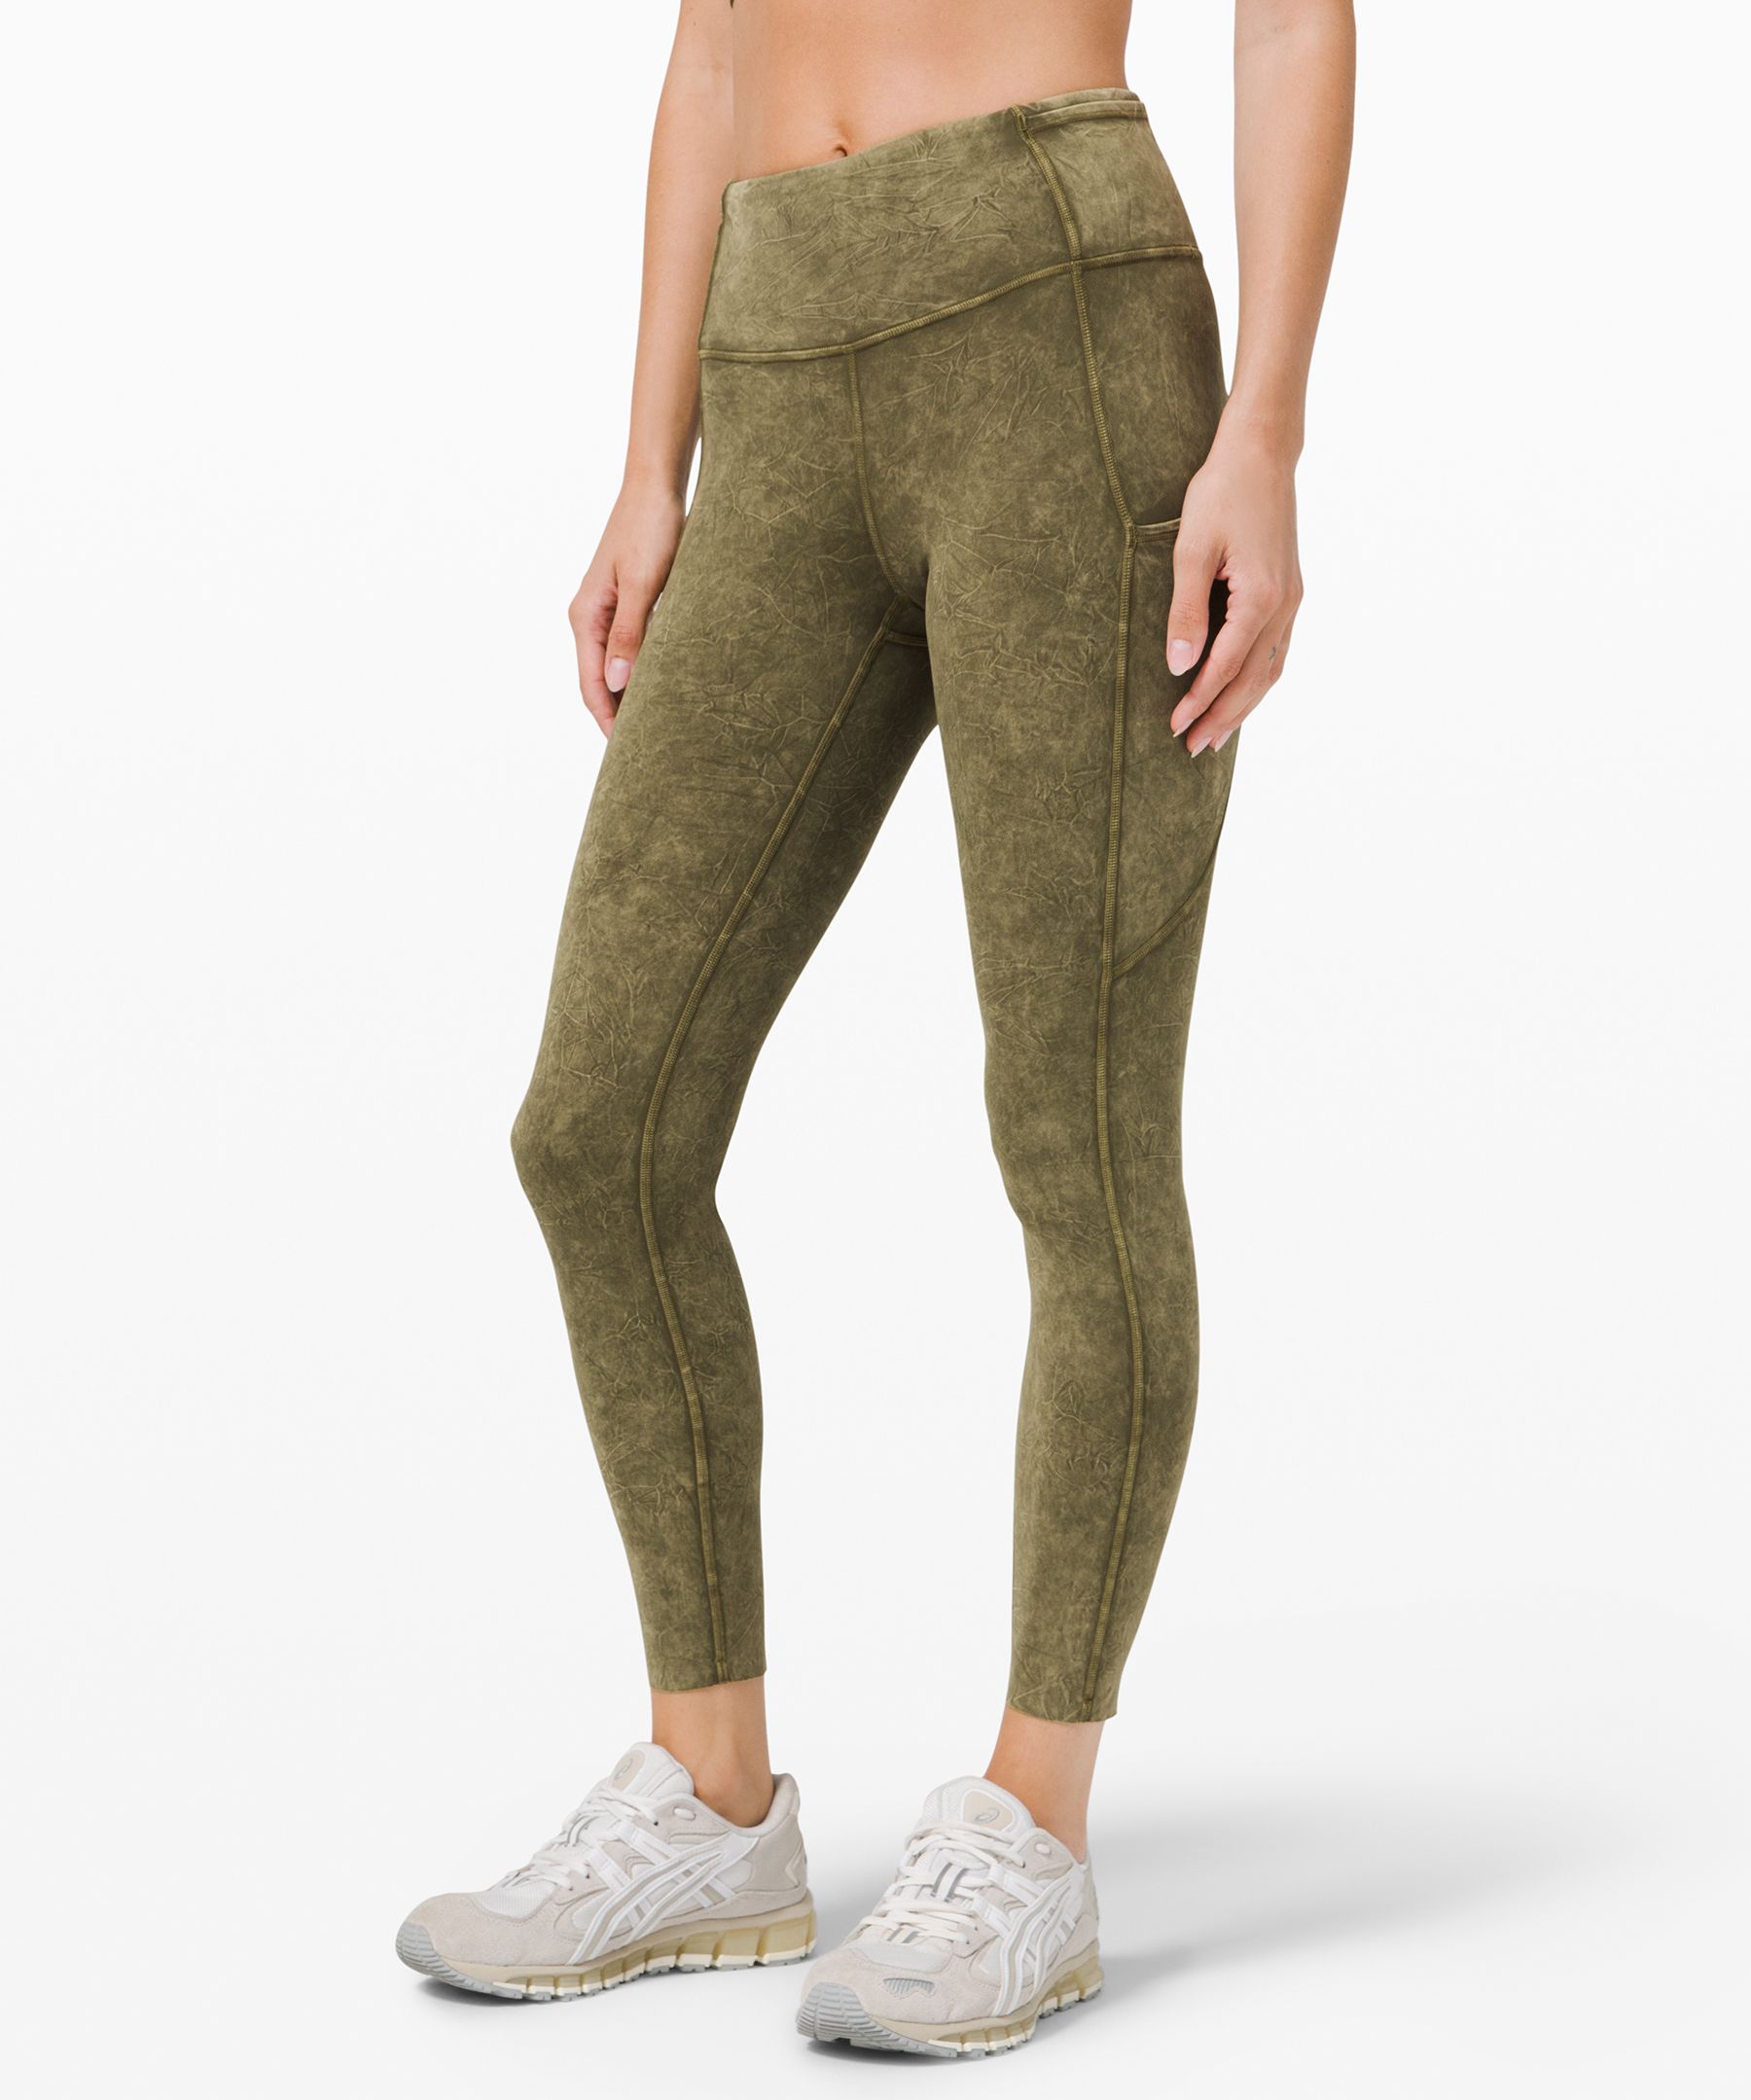 fast and free hr tight 25 lululemon